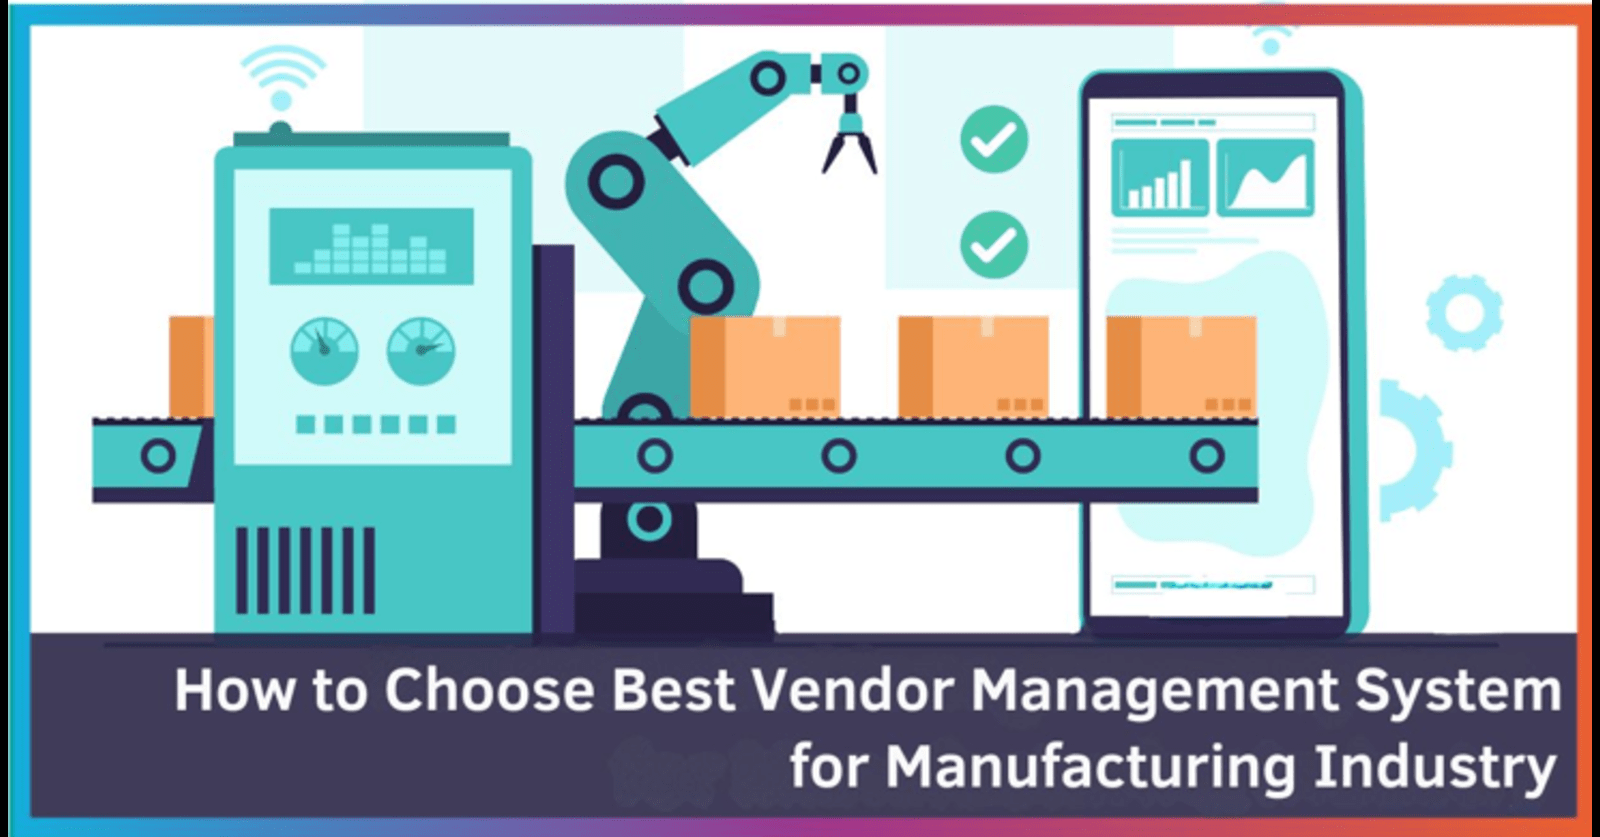 How to choose the Best Vendor management system for the Manufacturing Industry